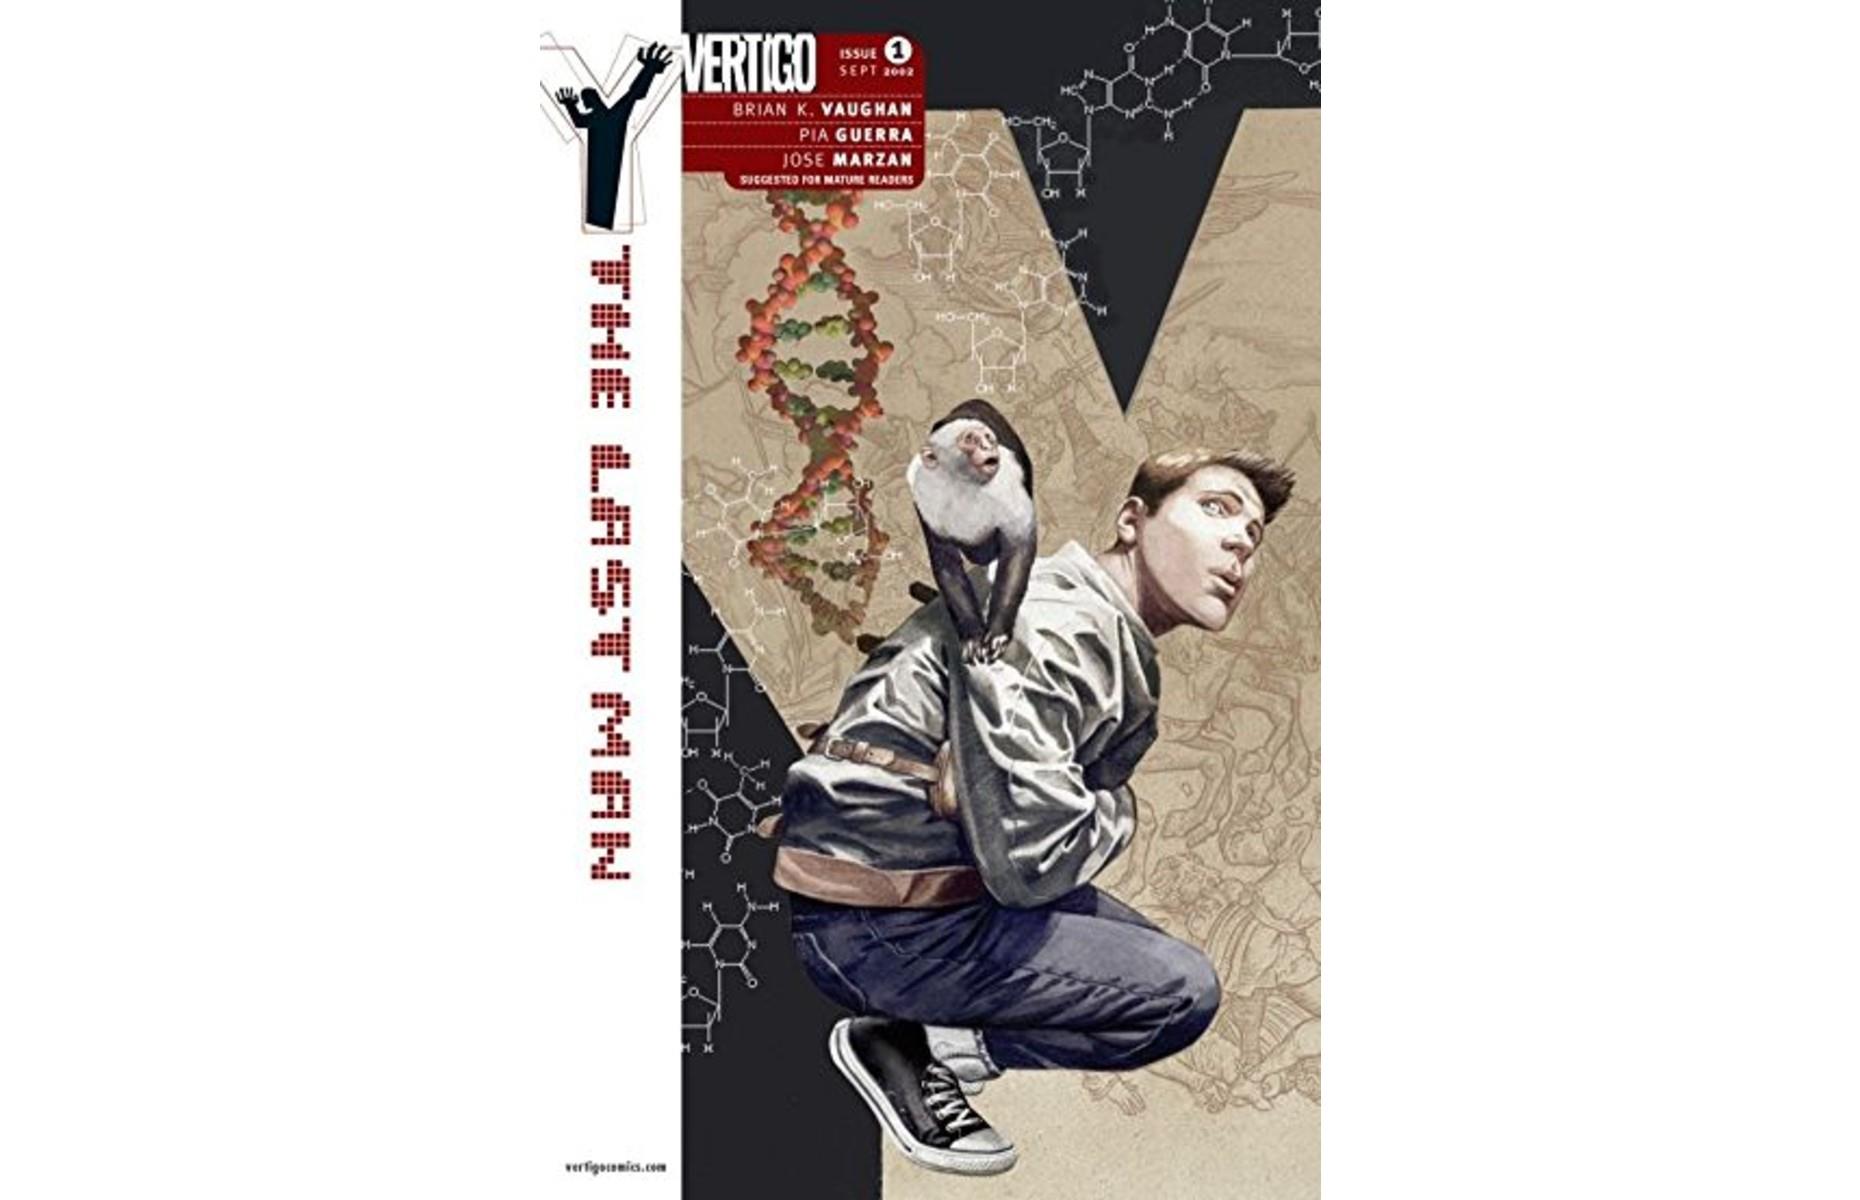 Y: The Last Man #1: up to £615 ($800)